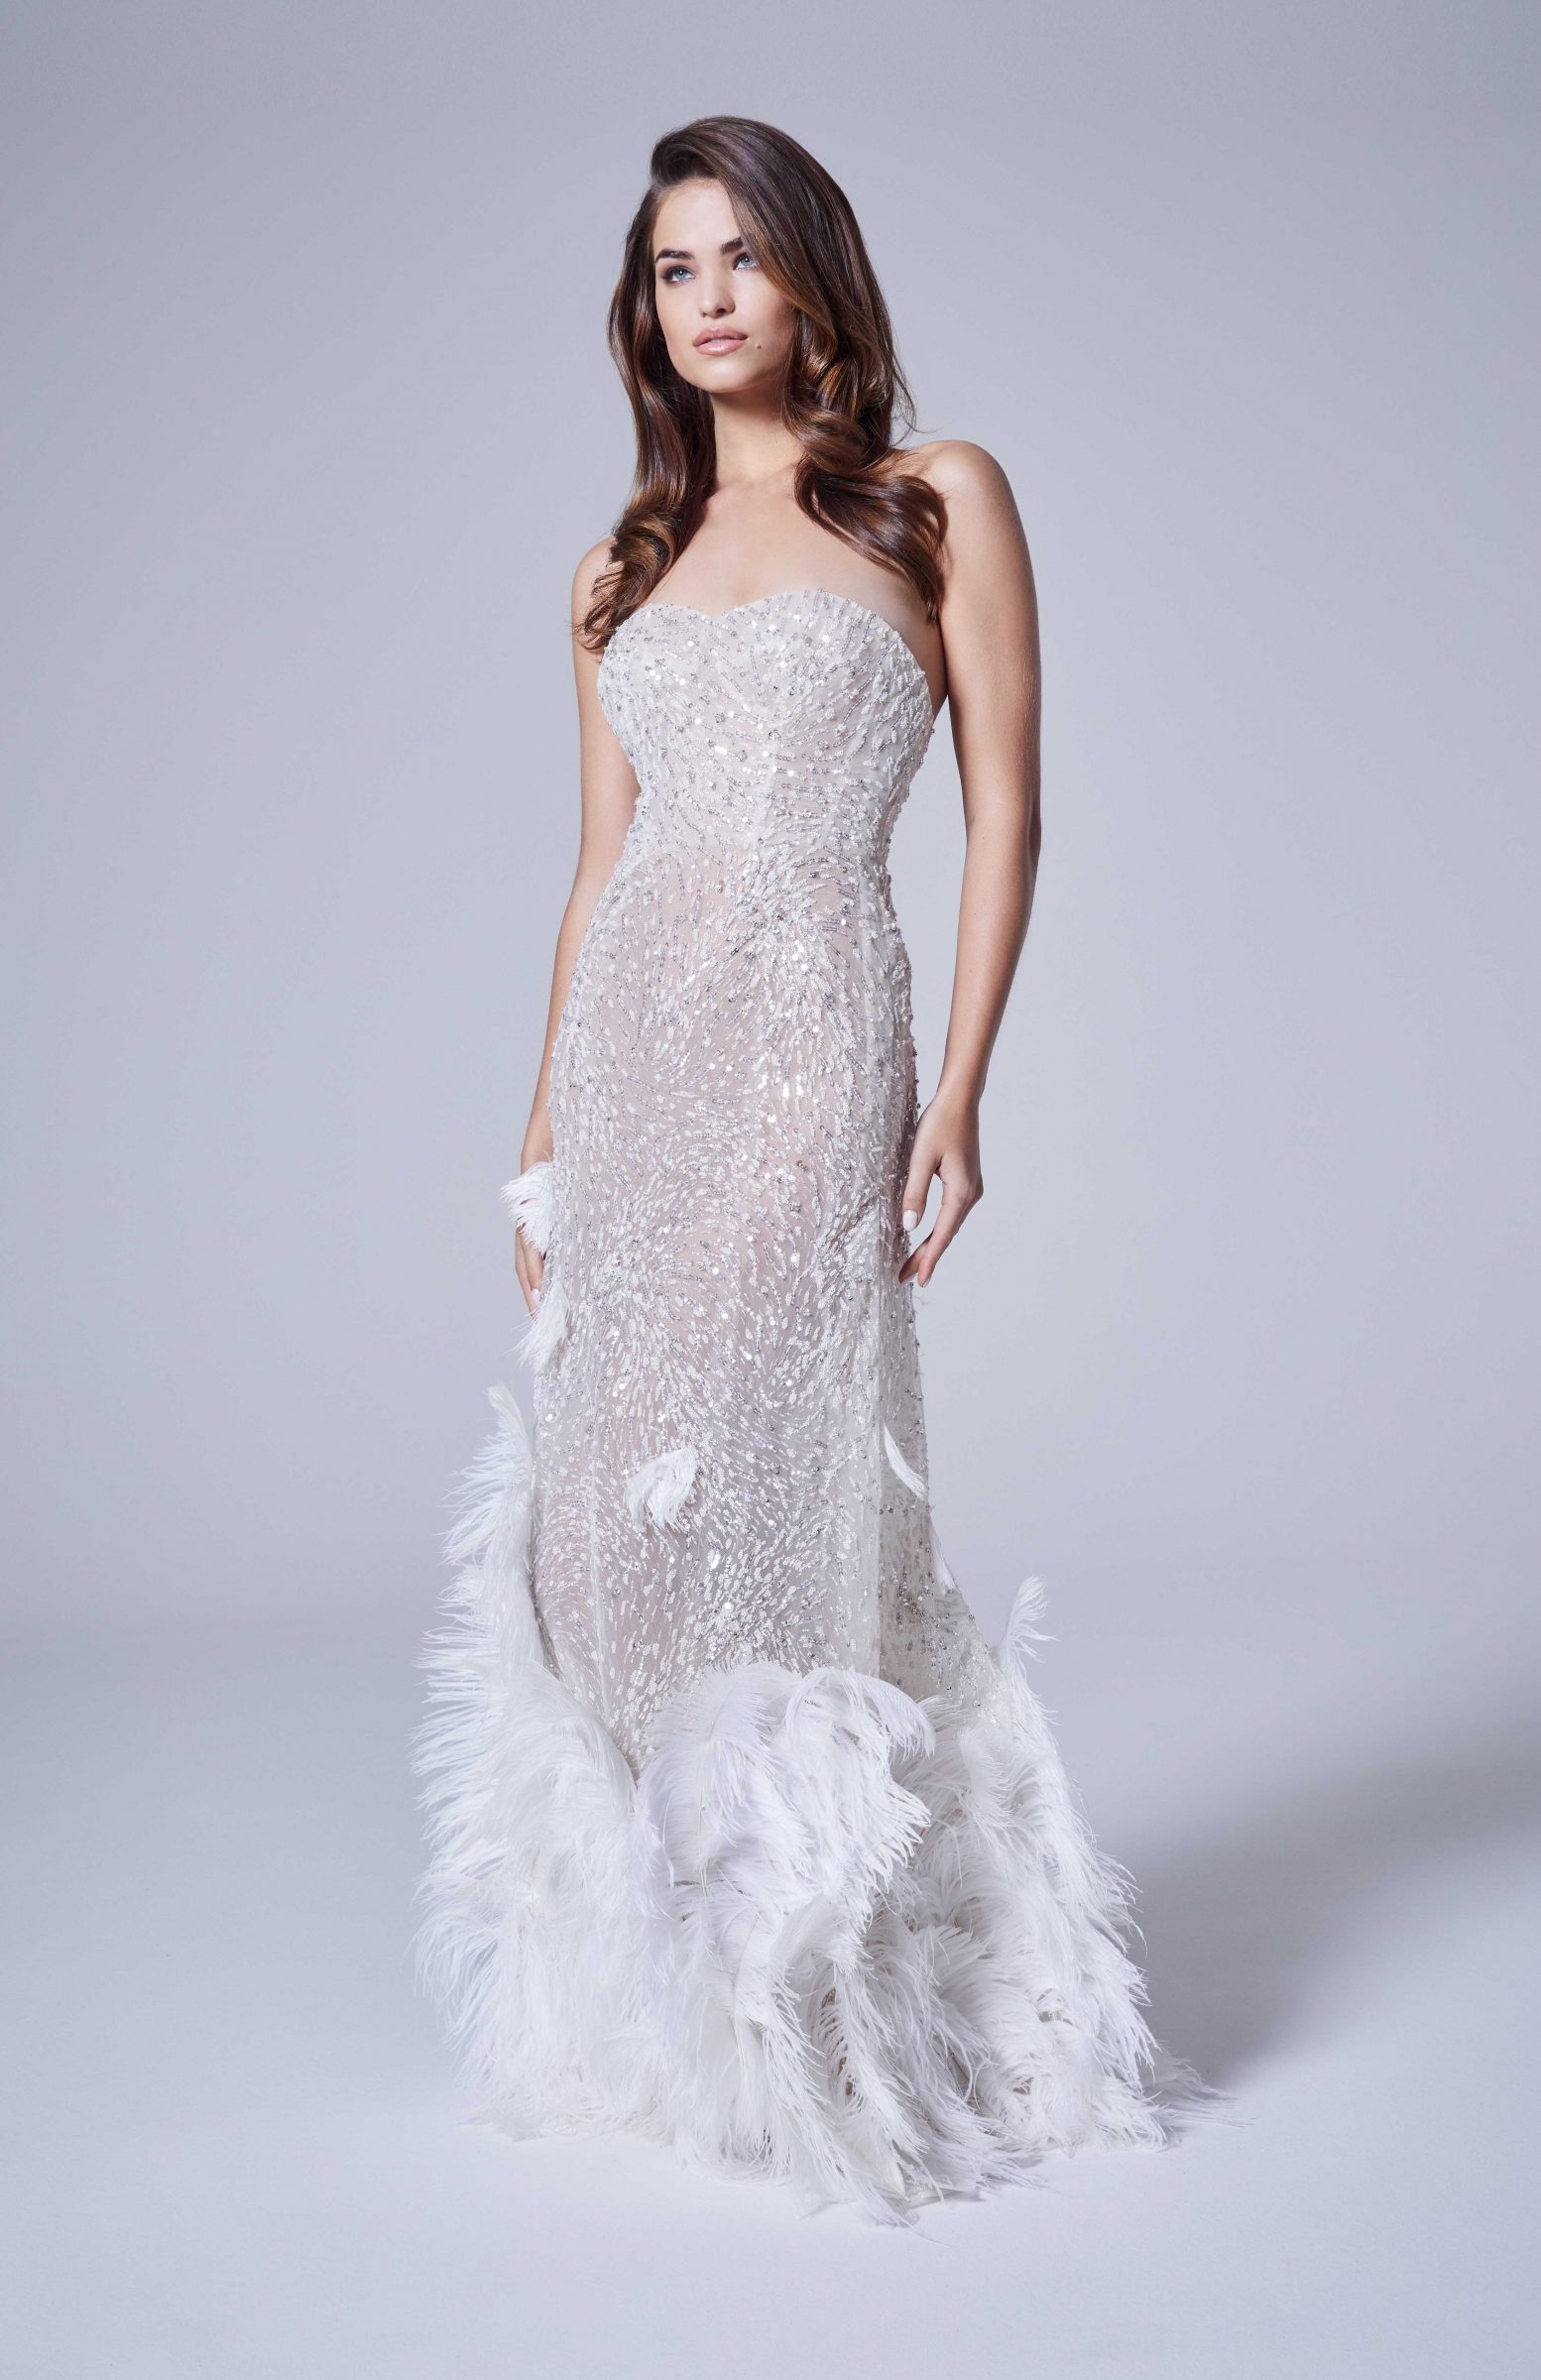 Sequin bridal gown with white feathers on bottom by Nicole + Felicia Couture